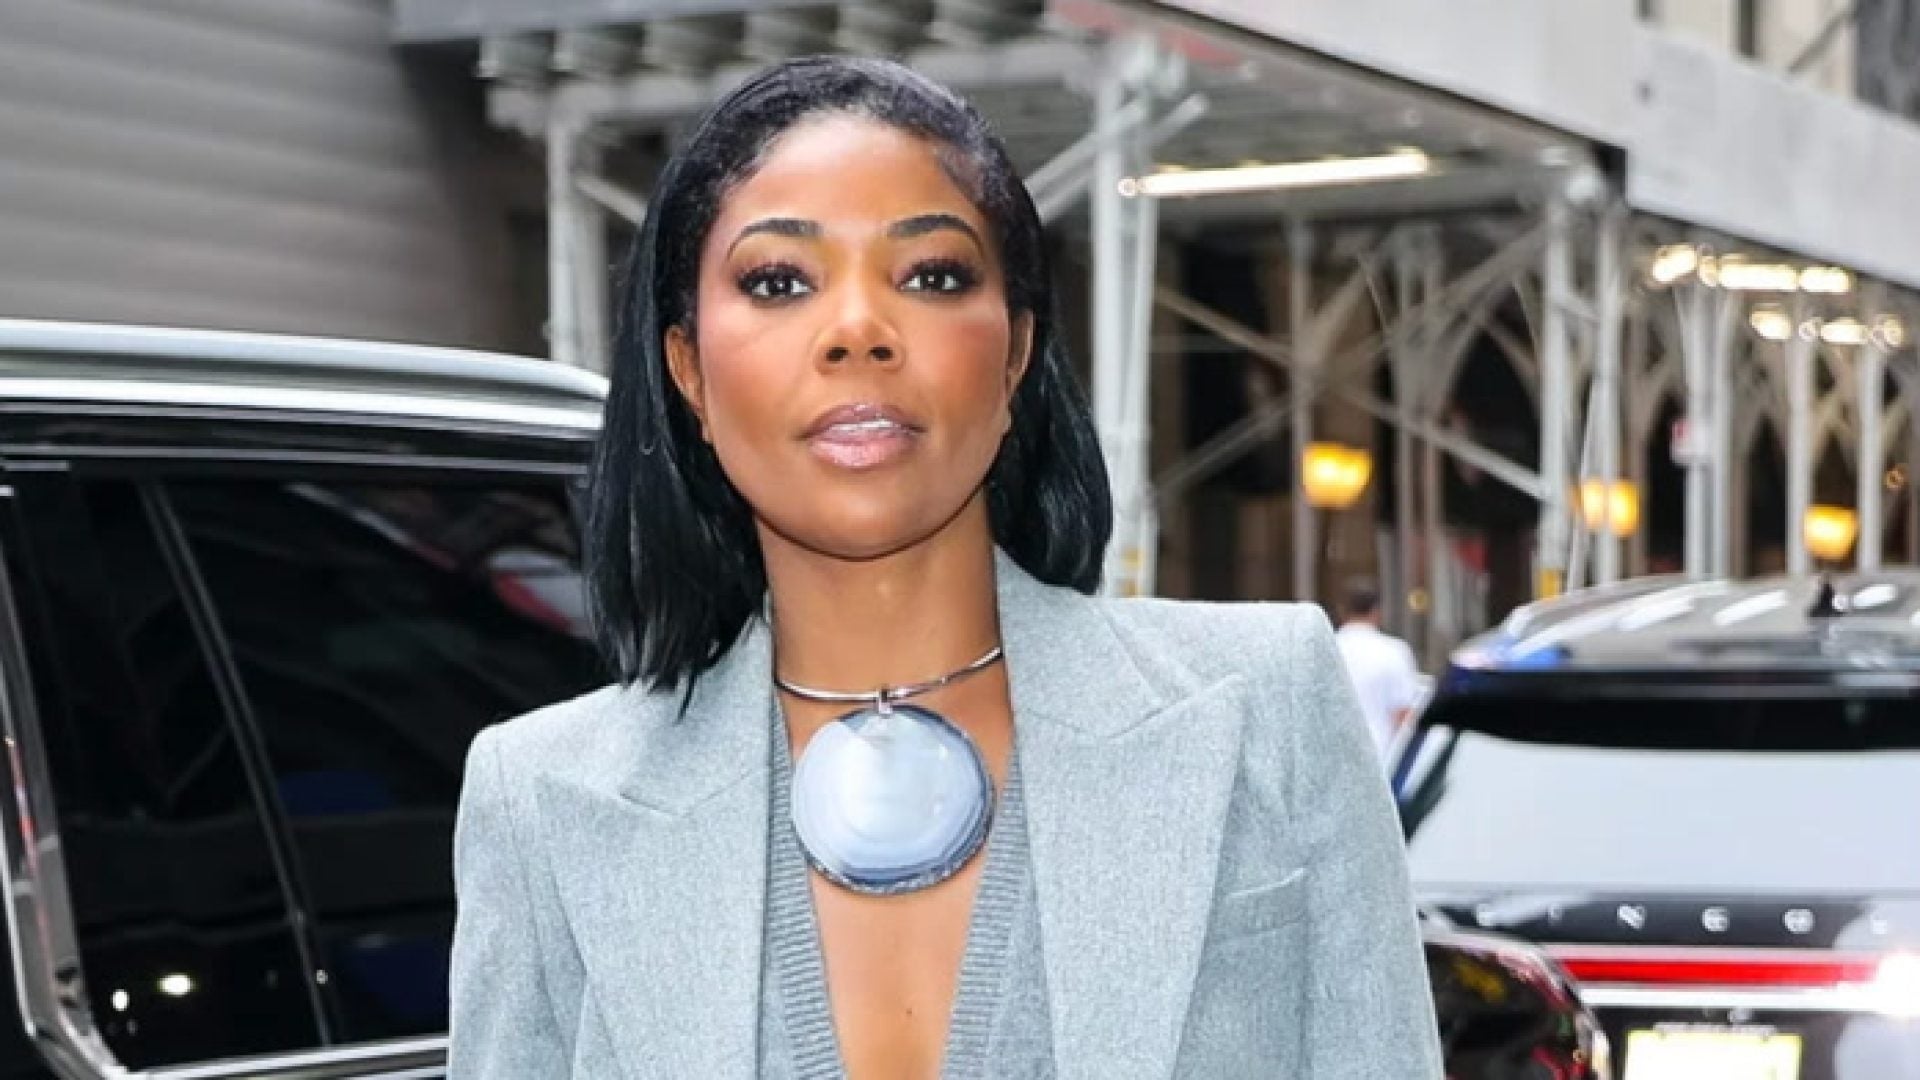 WATCH: In My Feed – Gabrielle Union’s Fashion Looks During Her Press Run